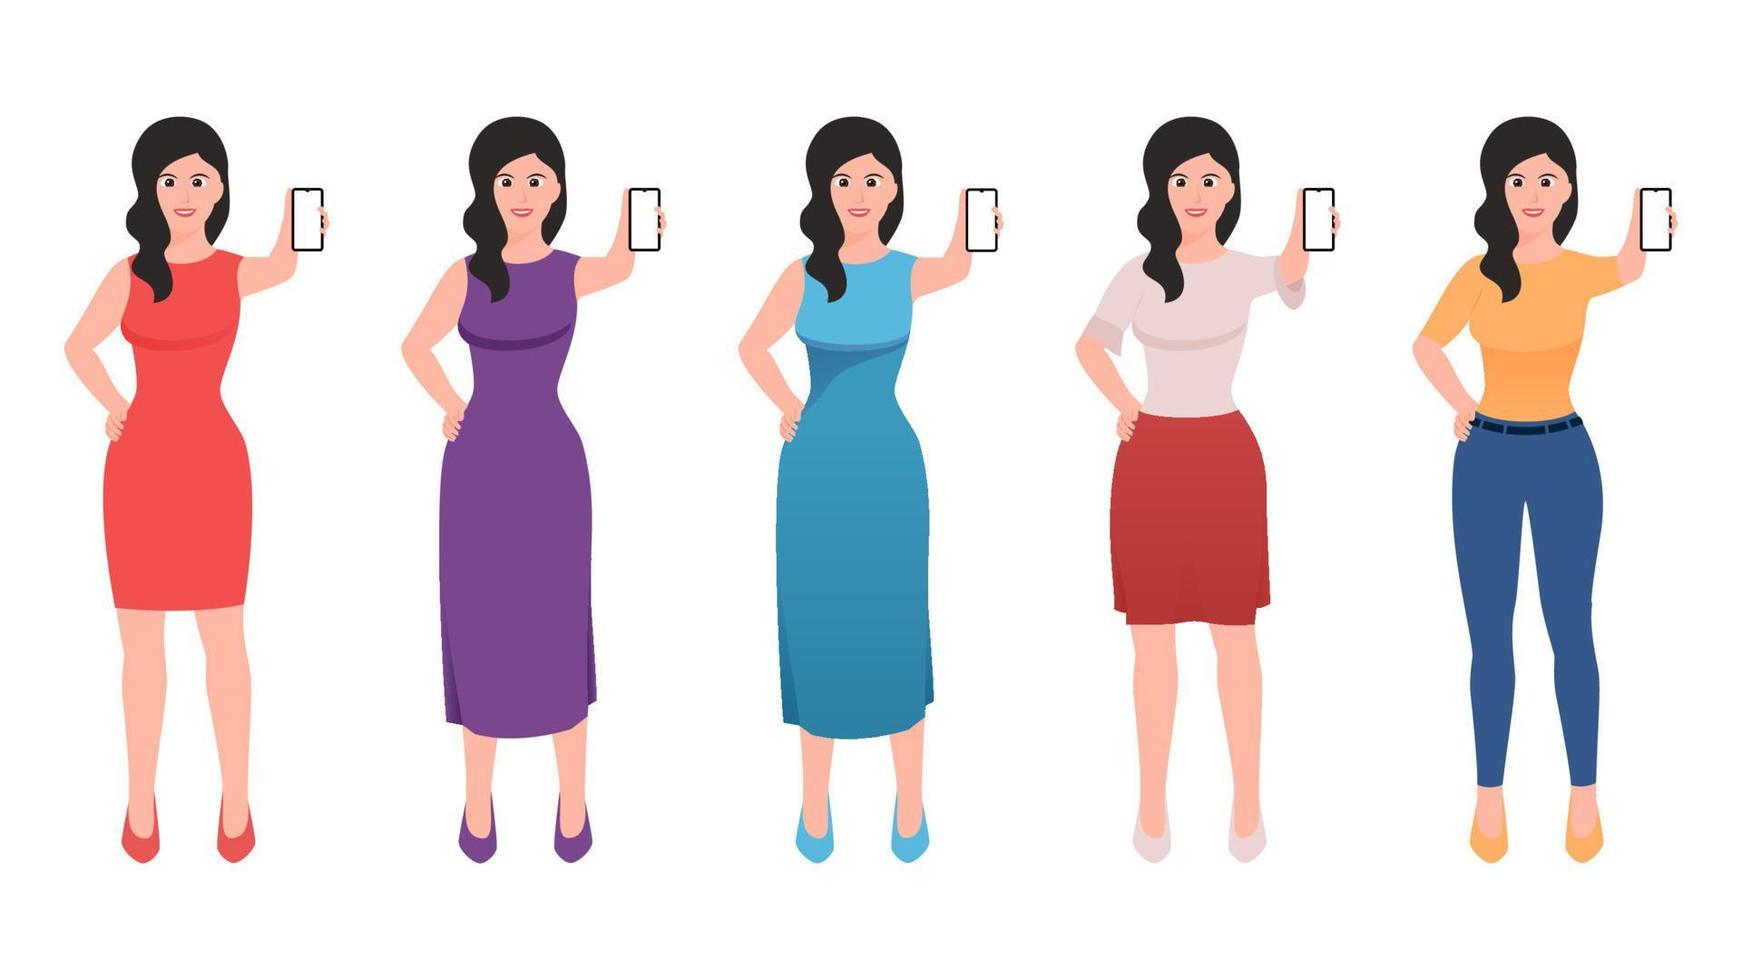 Girl showing mobile screen and other hand on waist, flat character vector illustration set.